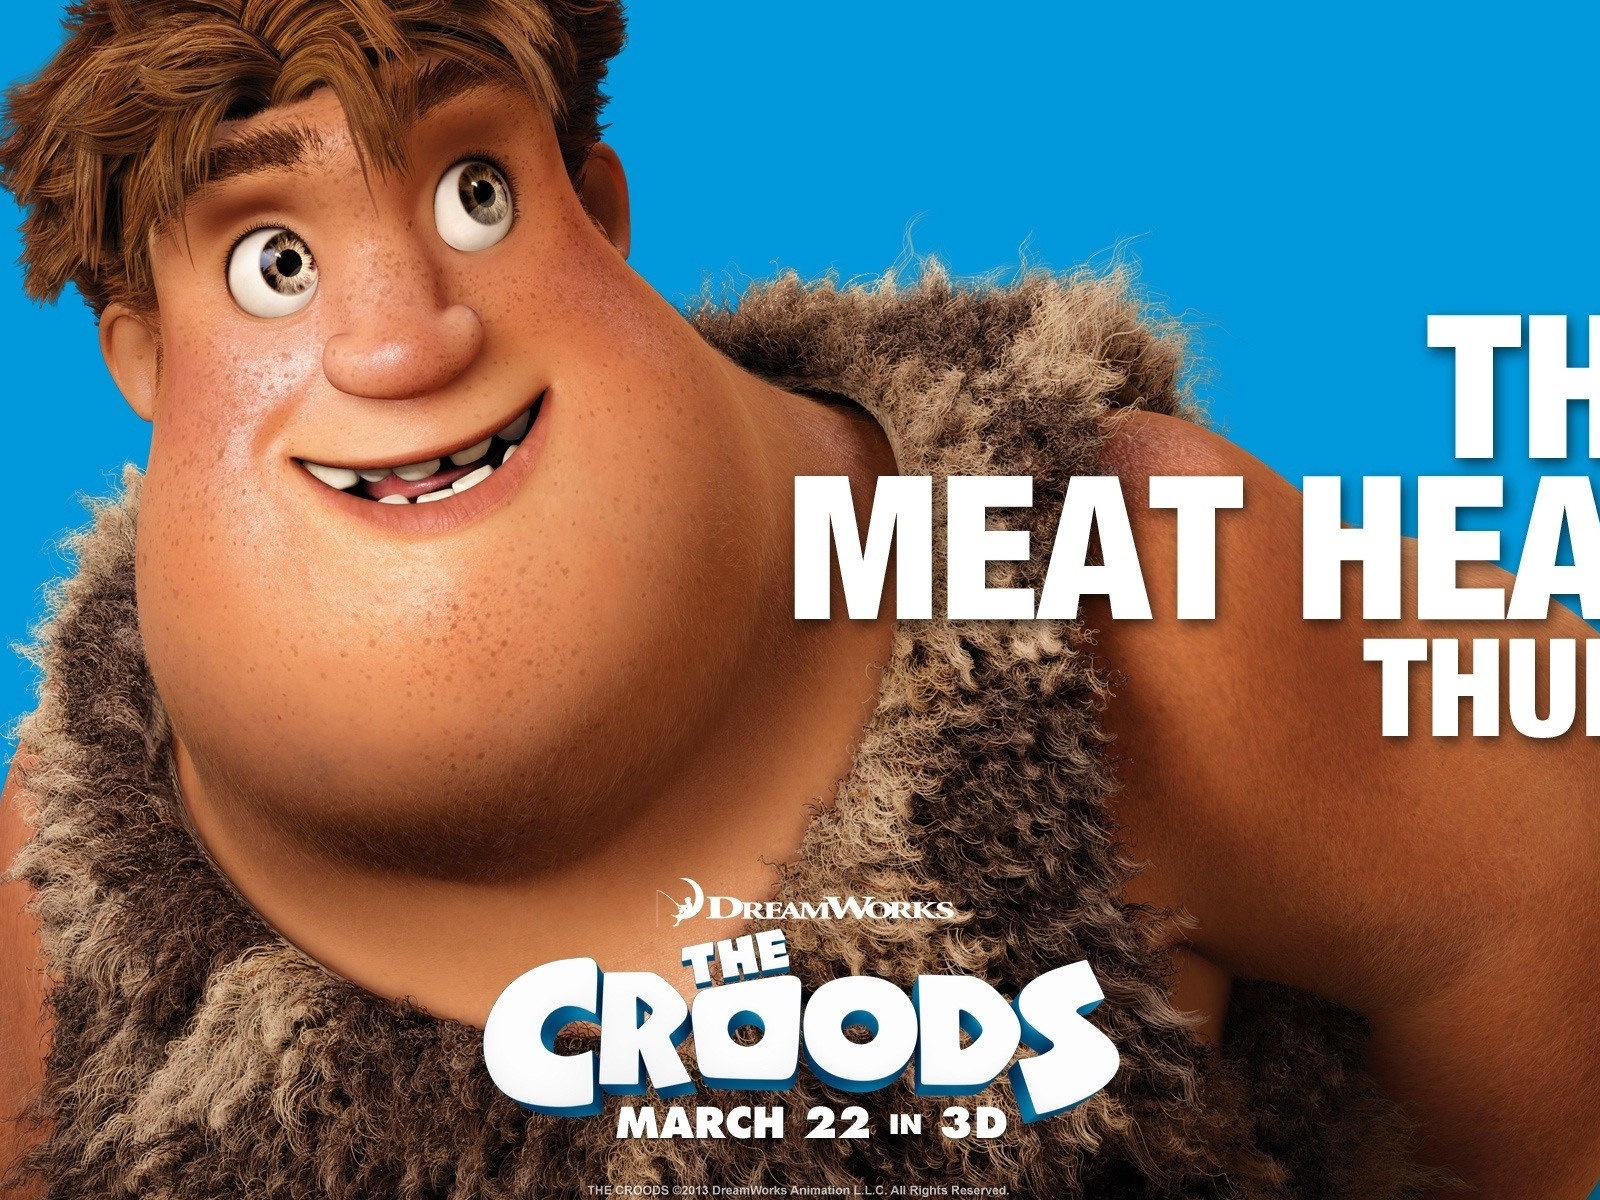 V Croods HD Movie Wallpapers #13 - 1600x1200